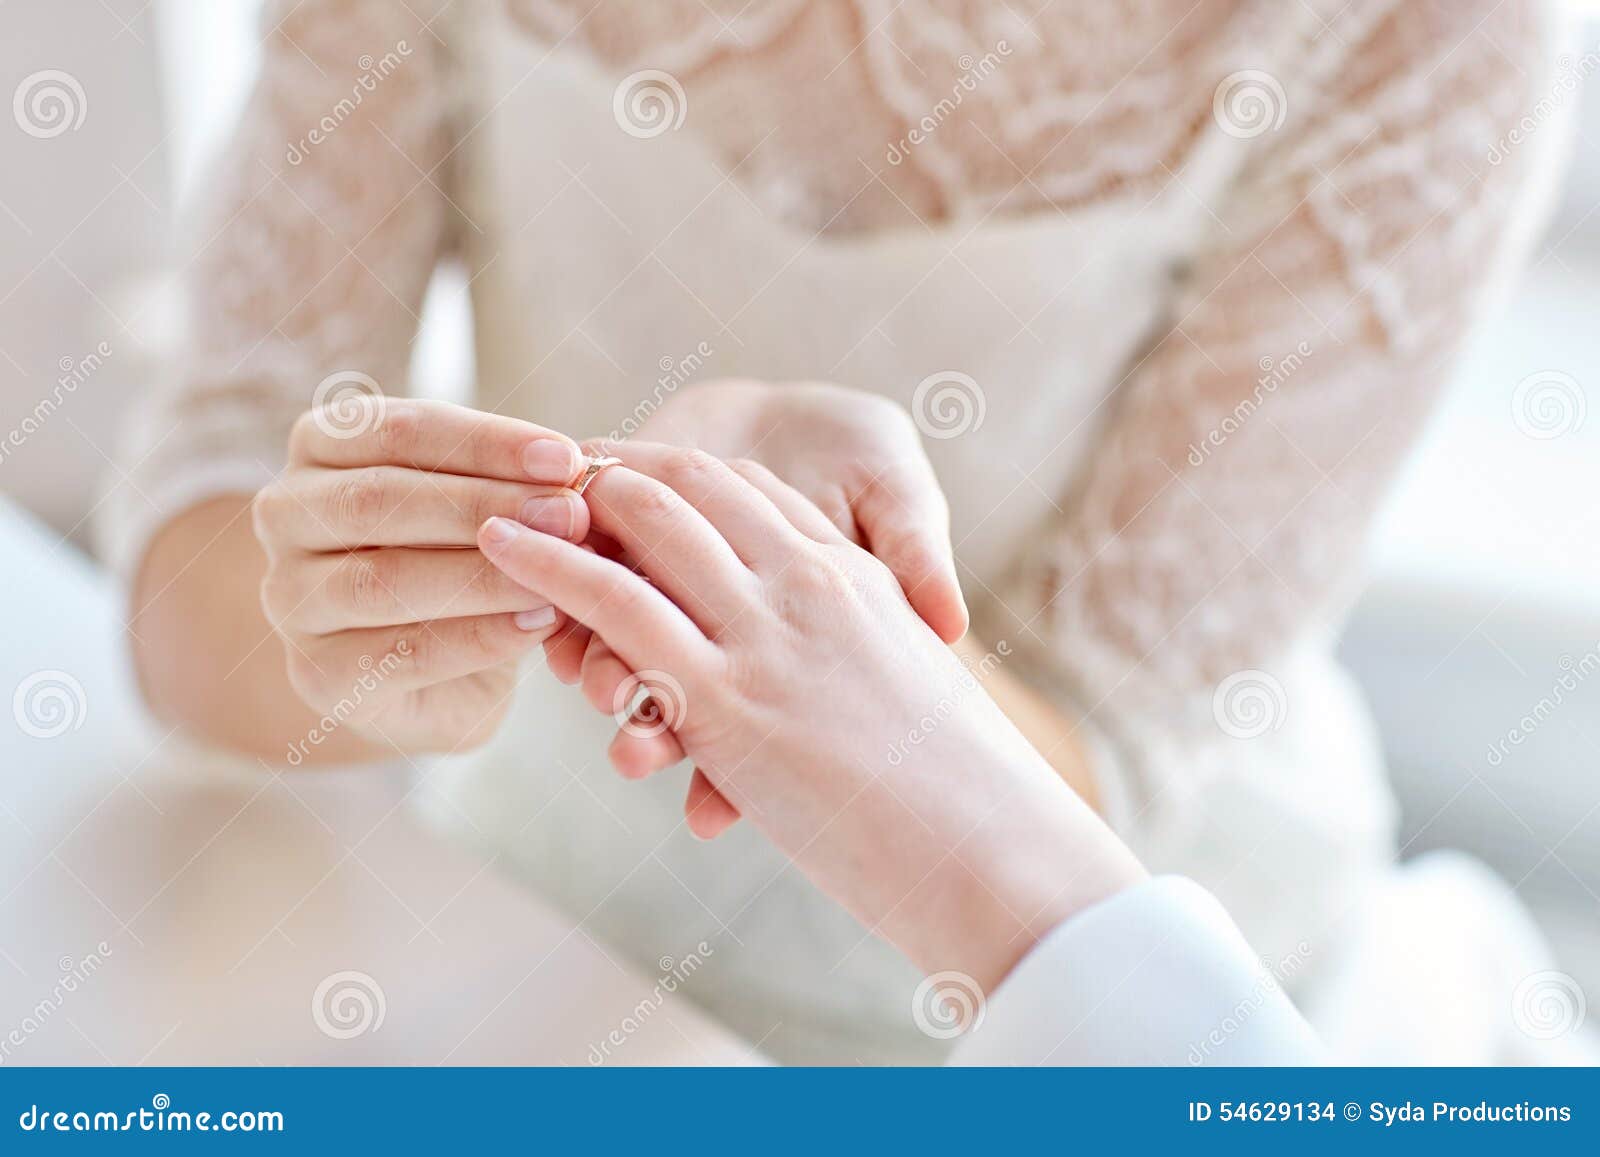 Close Up of Lesbian Couple Hands with Wedding Ring Stock Photo pic